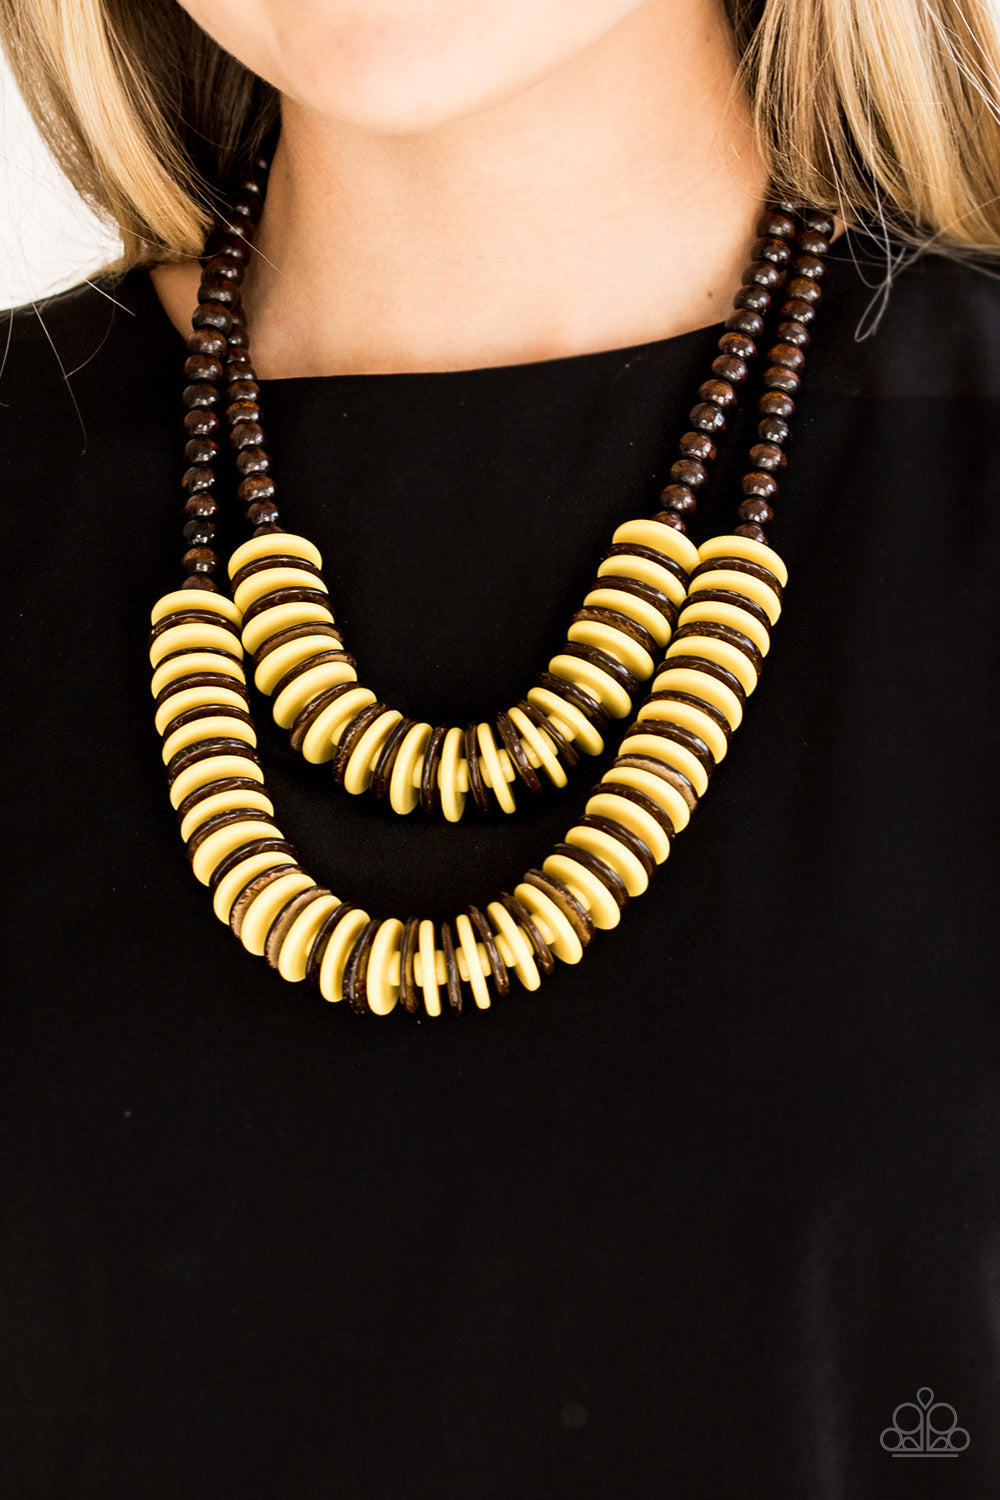 Dominican Disco - Yellow Necklace 1208n